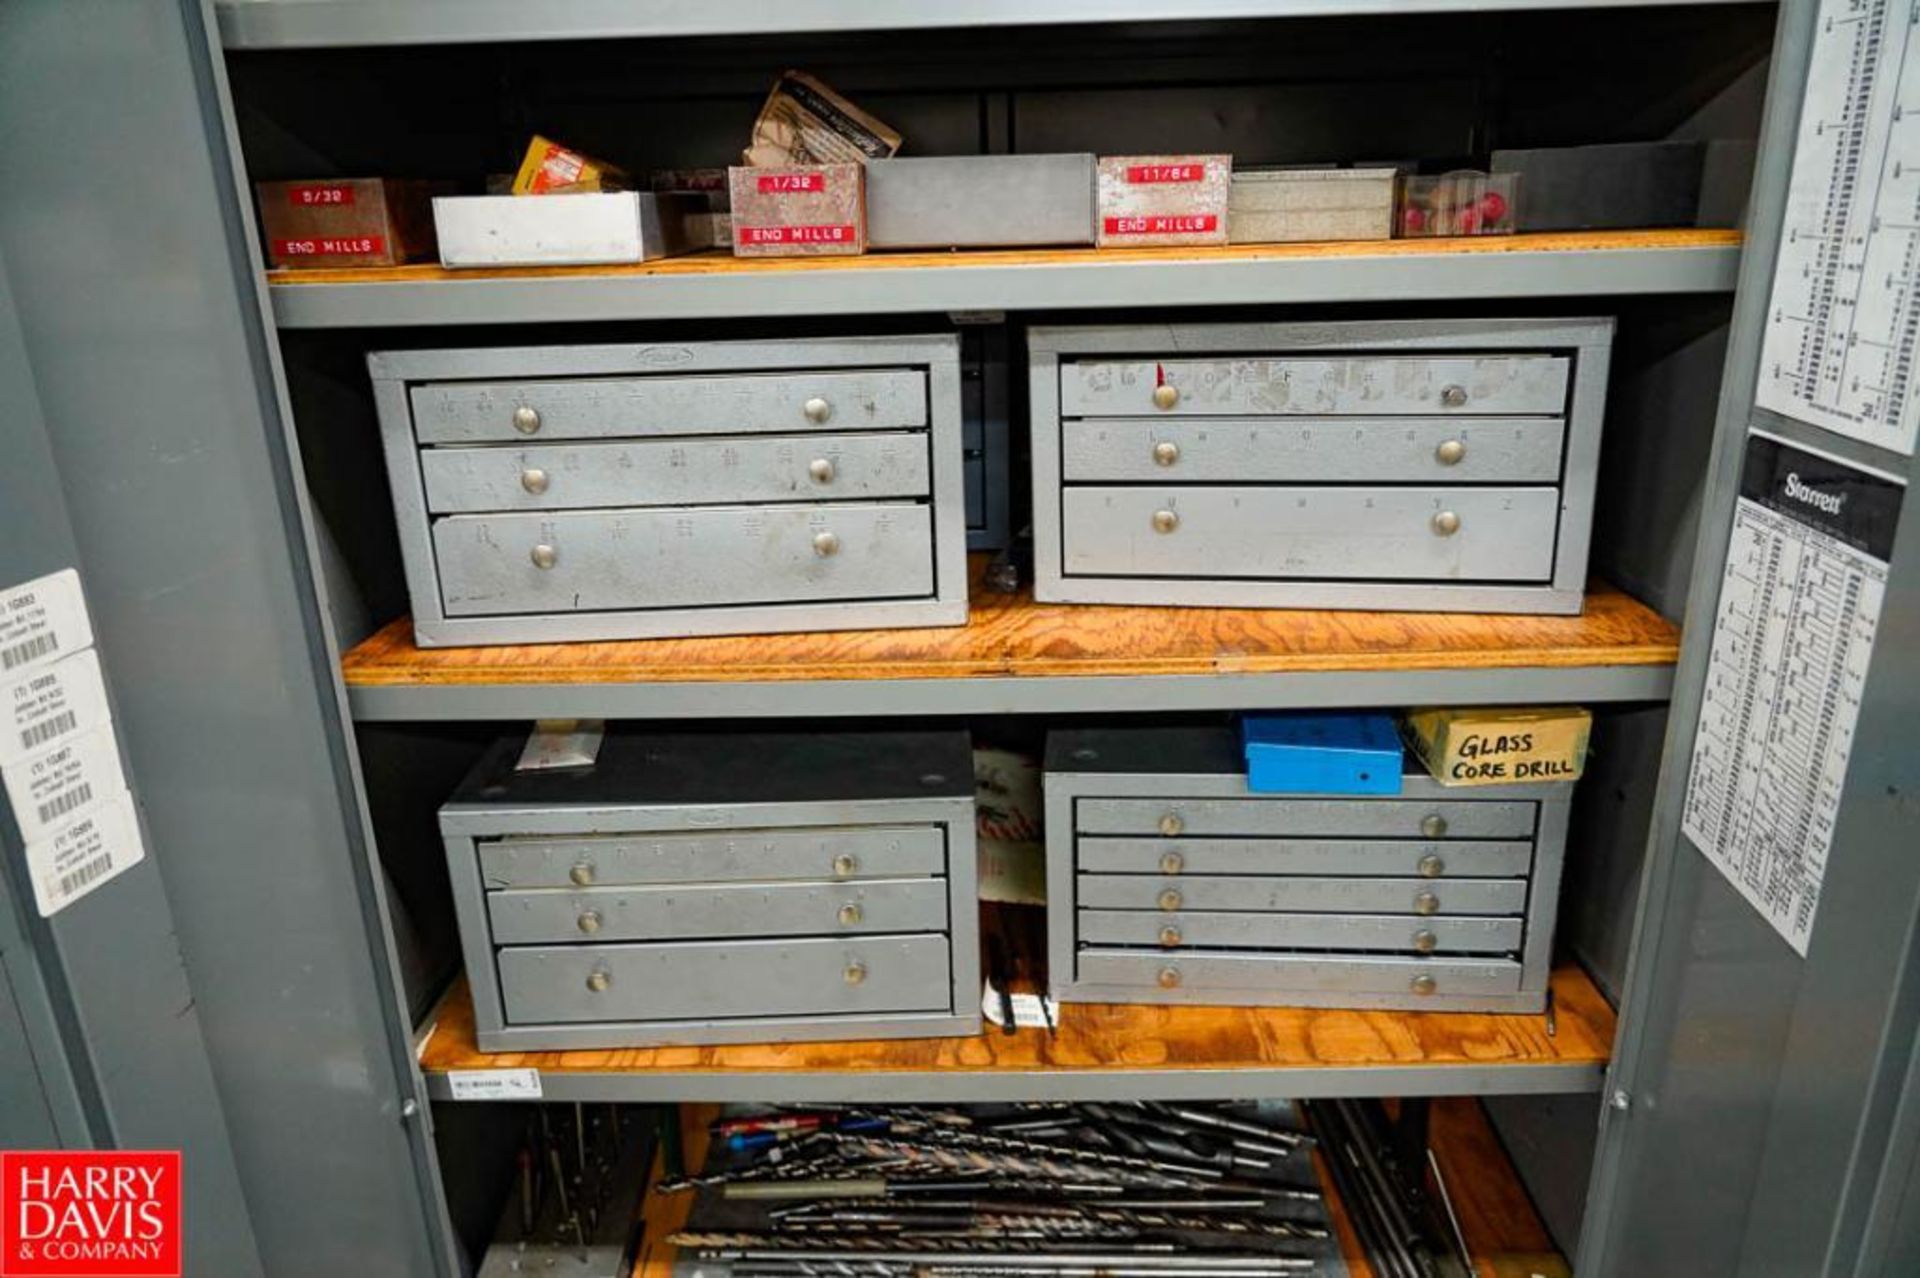 Contents of Tool Storage Crib 1 (3) 2 Door Metal Cabinet Filled with Lathe Tooling Bars, Collets, Dr - Image 21 of 24